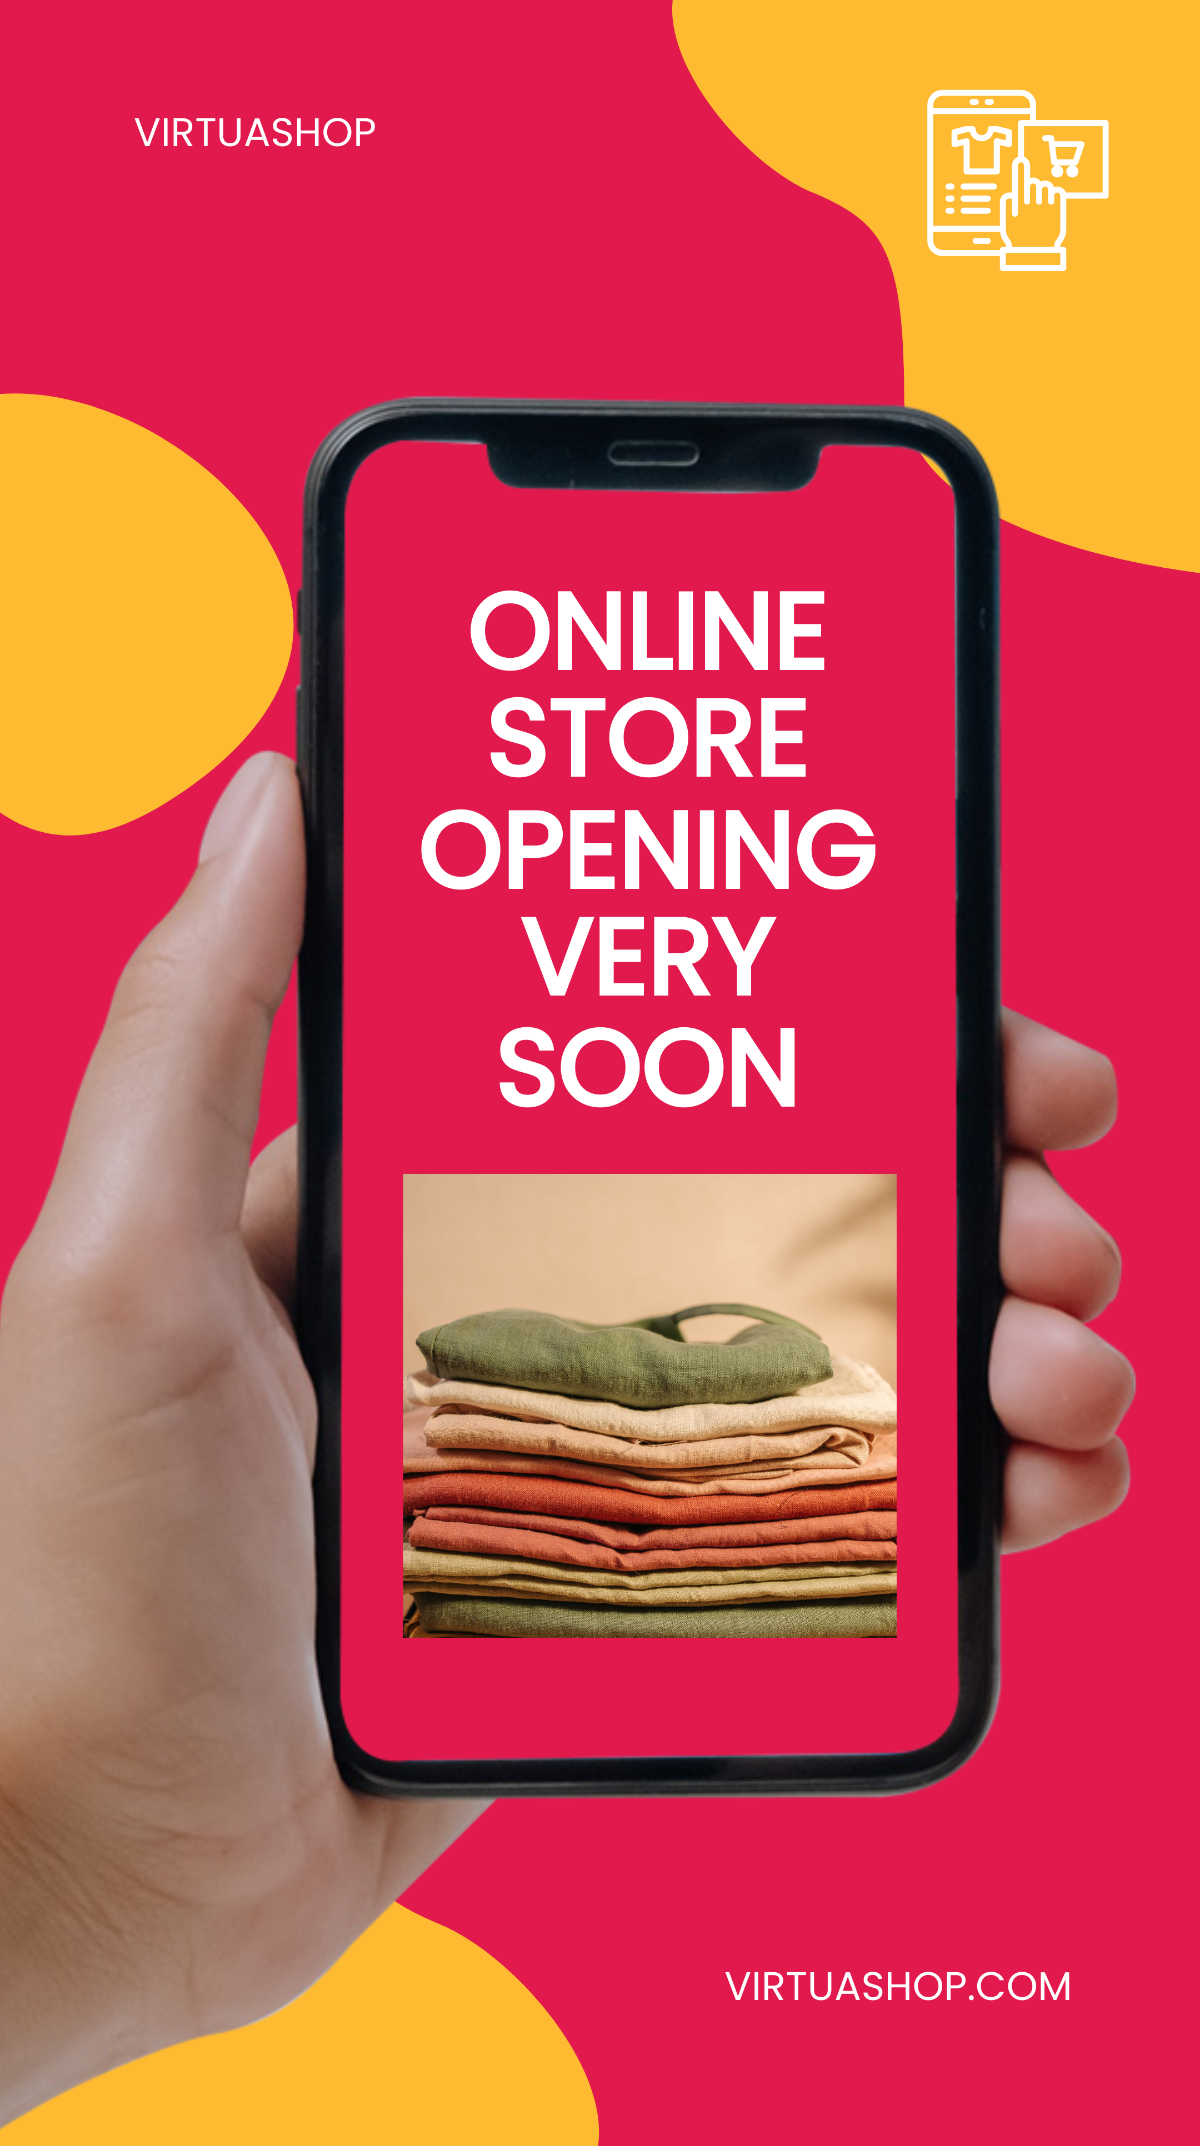 Online Store Open Announcement Instagram Story Template